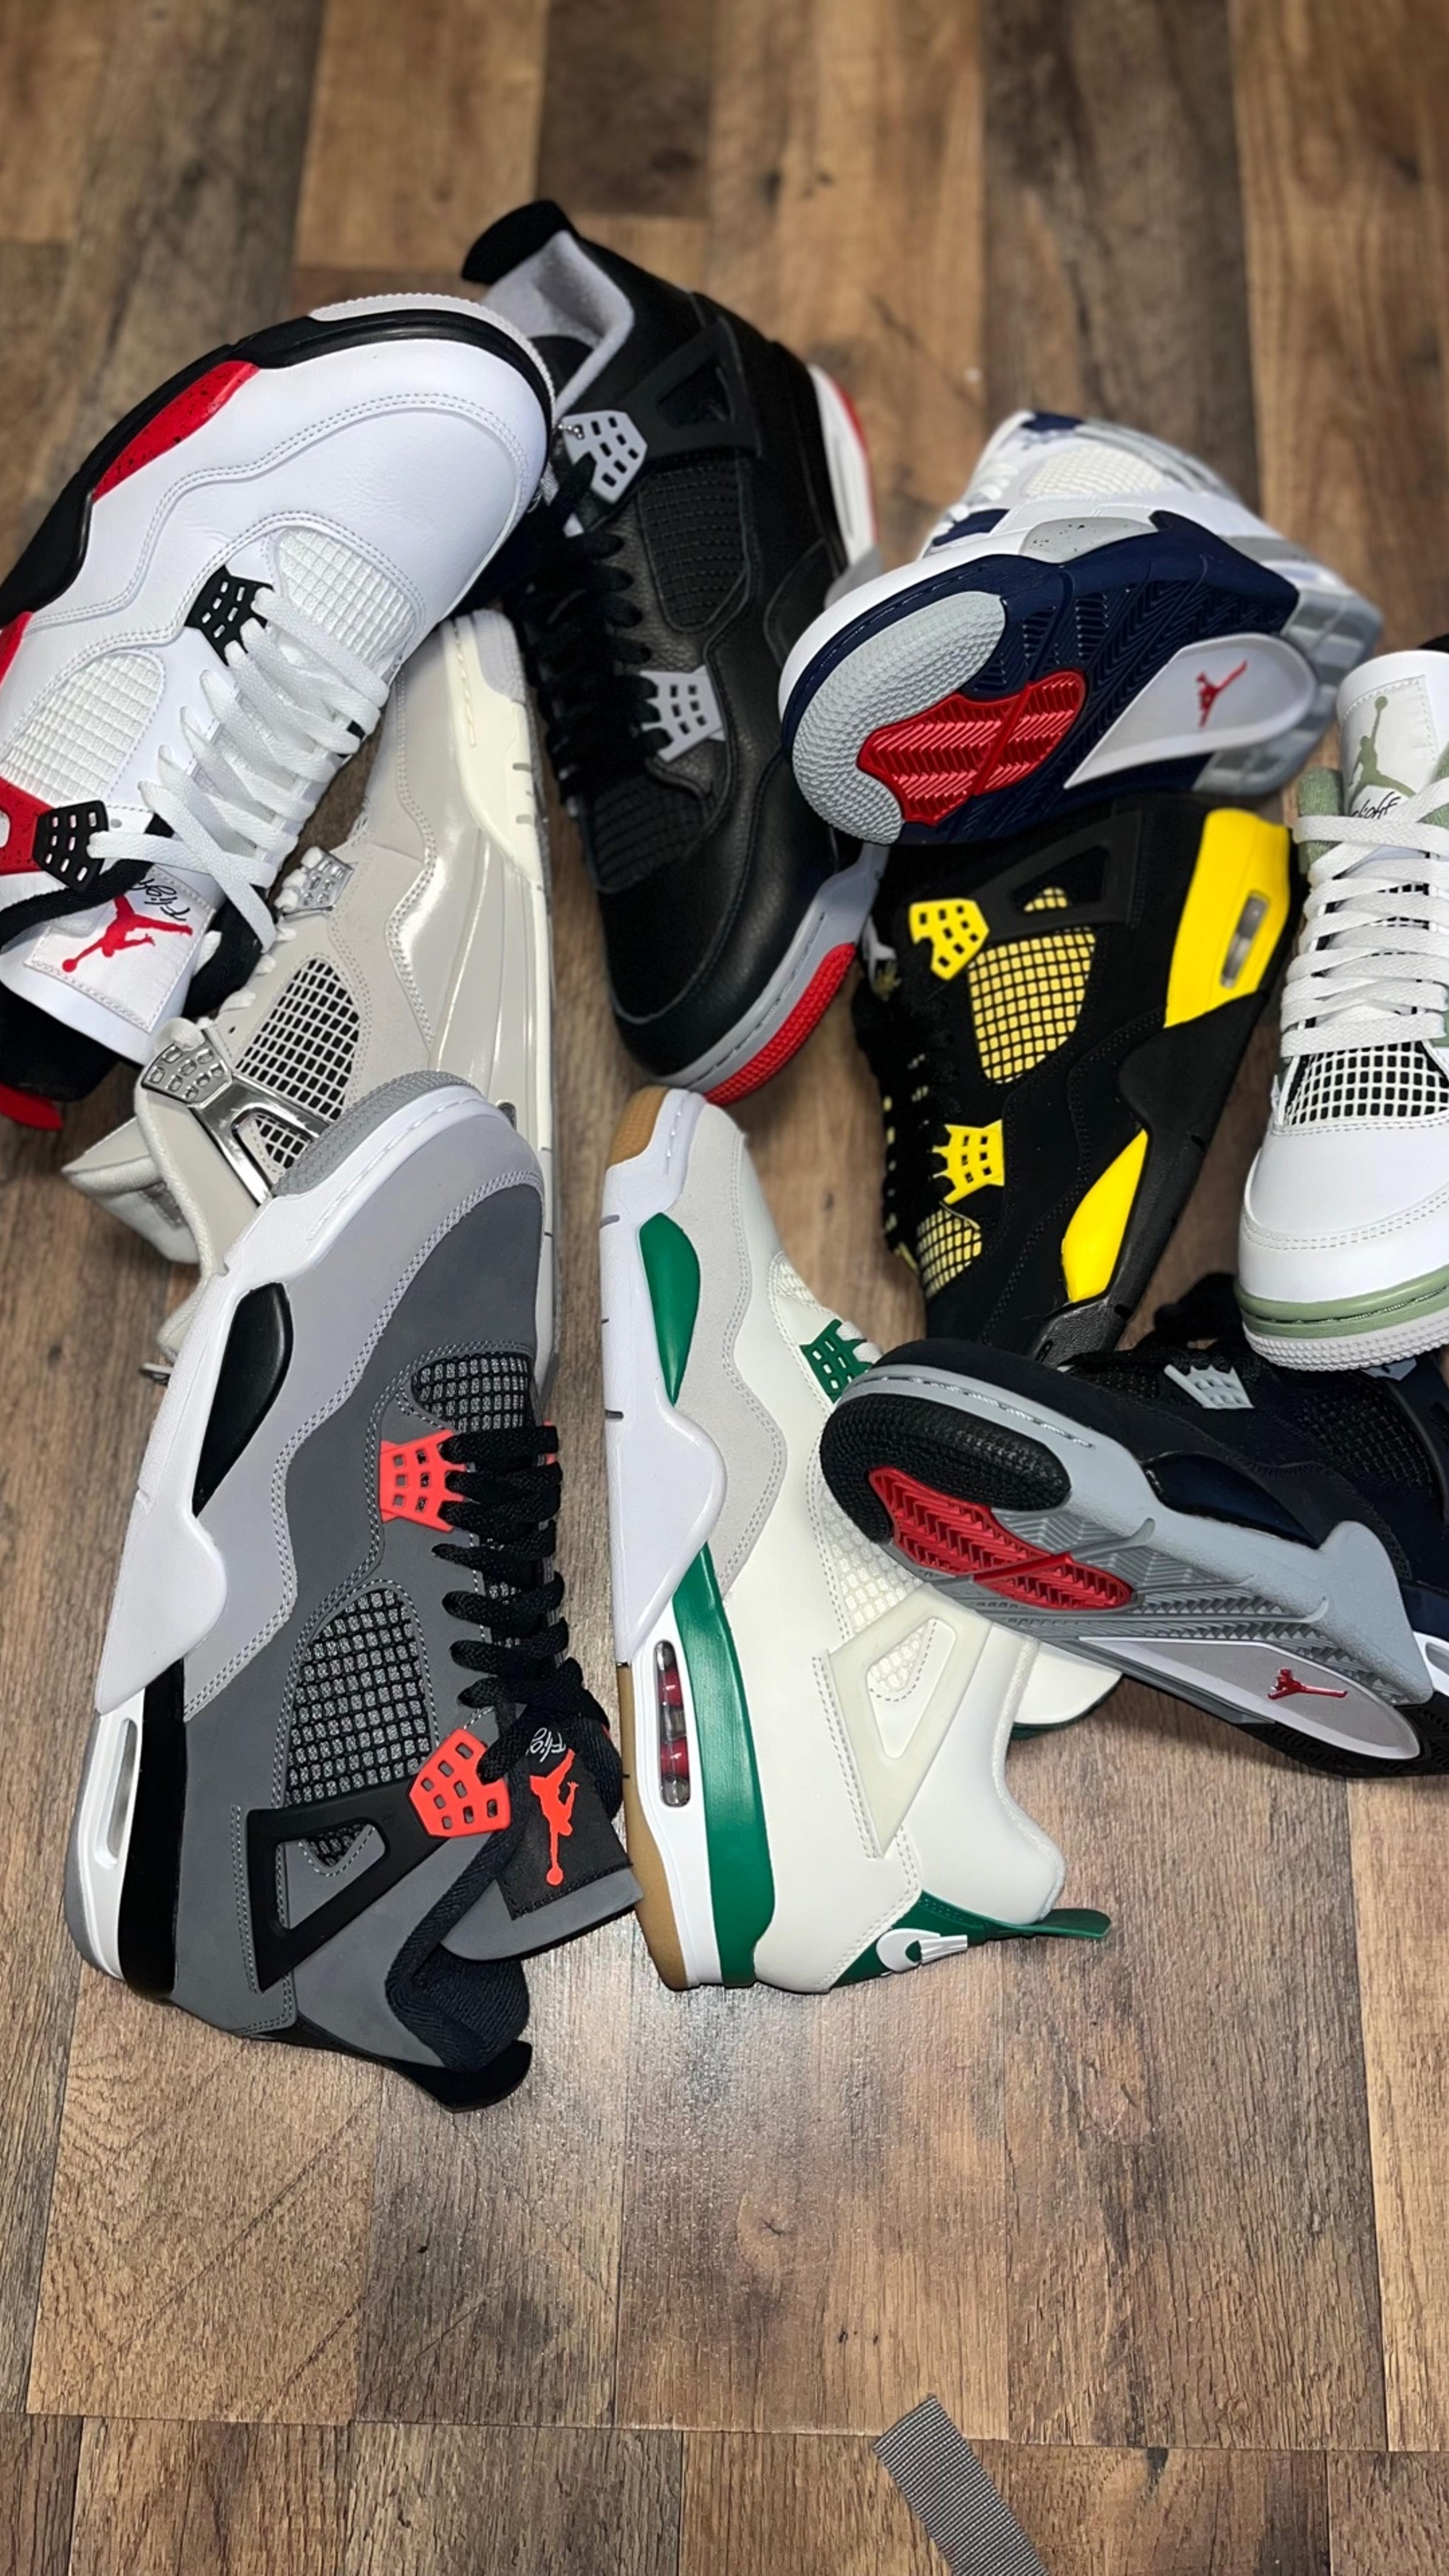 Preview image for the show titled "All Around Retro: JORDAN 4!!!! Mystery Box’s📦" at Today @ 6:00 PM